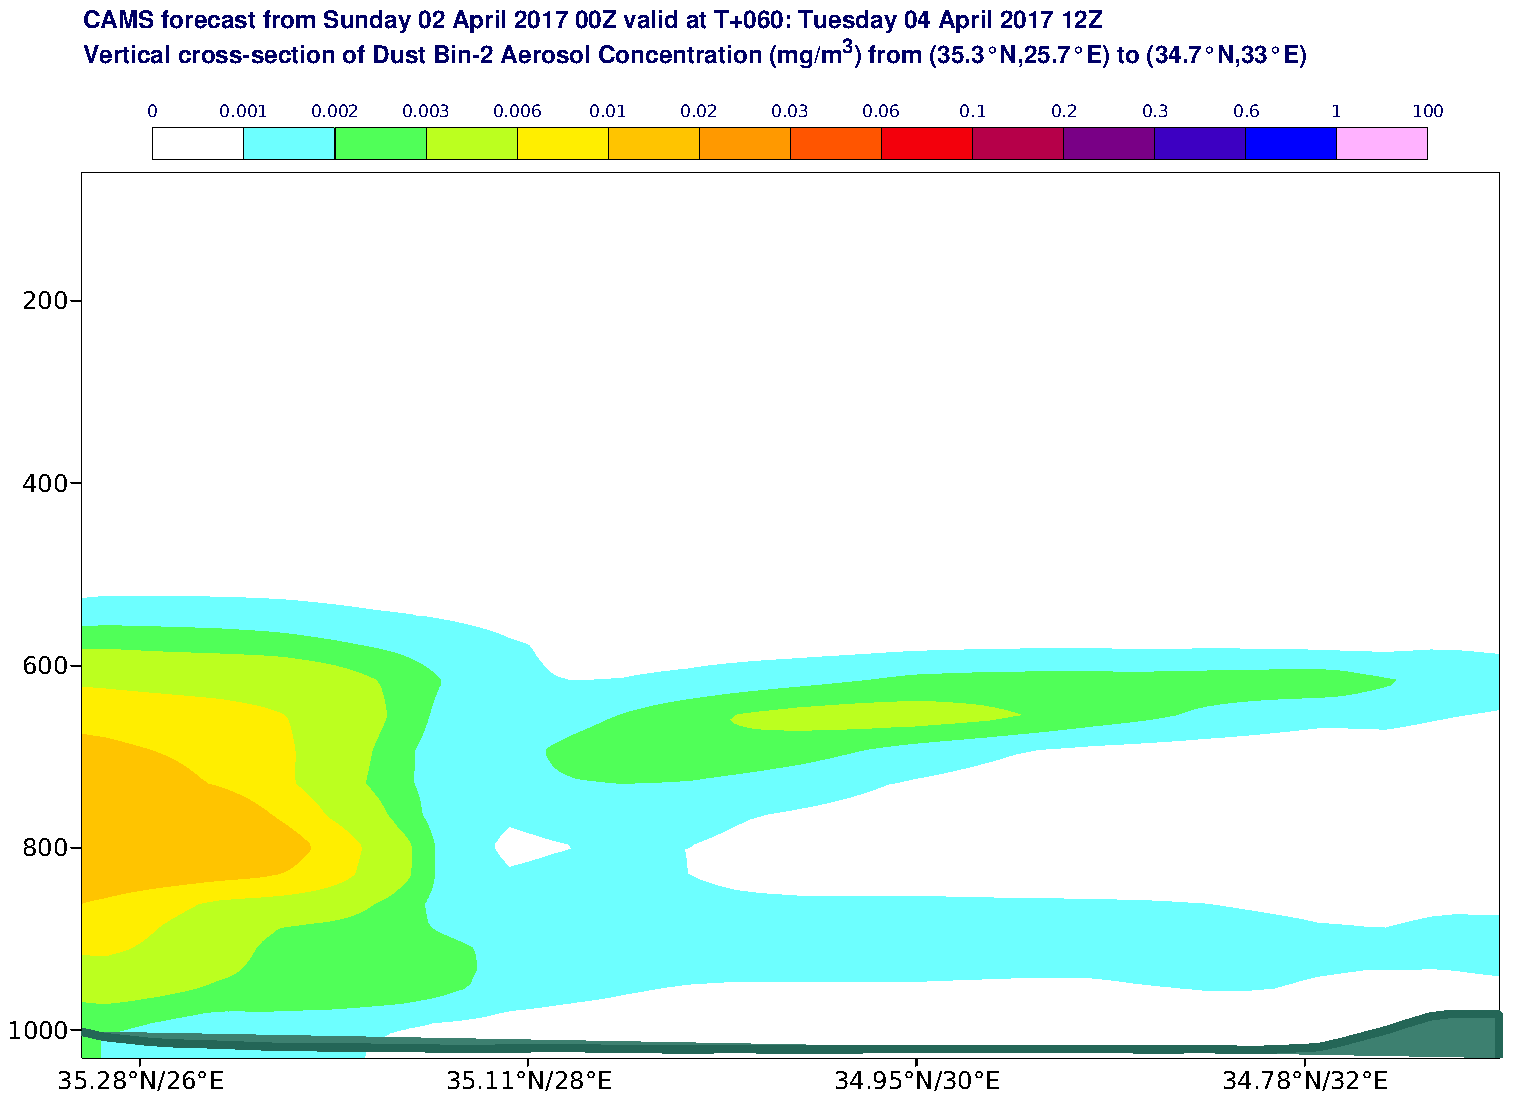 Vertical cross-section of Dust Bin-2 Aerosol Concentration (mg/m3) valid at T60 - 2017-04-04 12:00